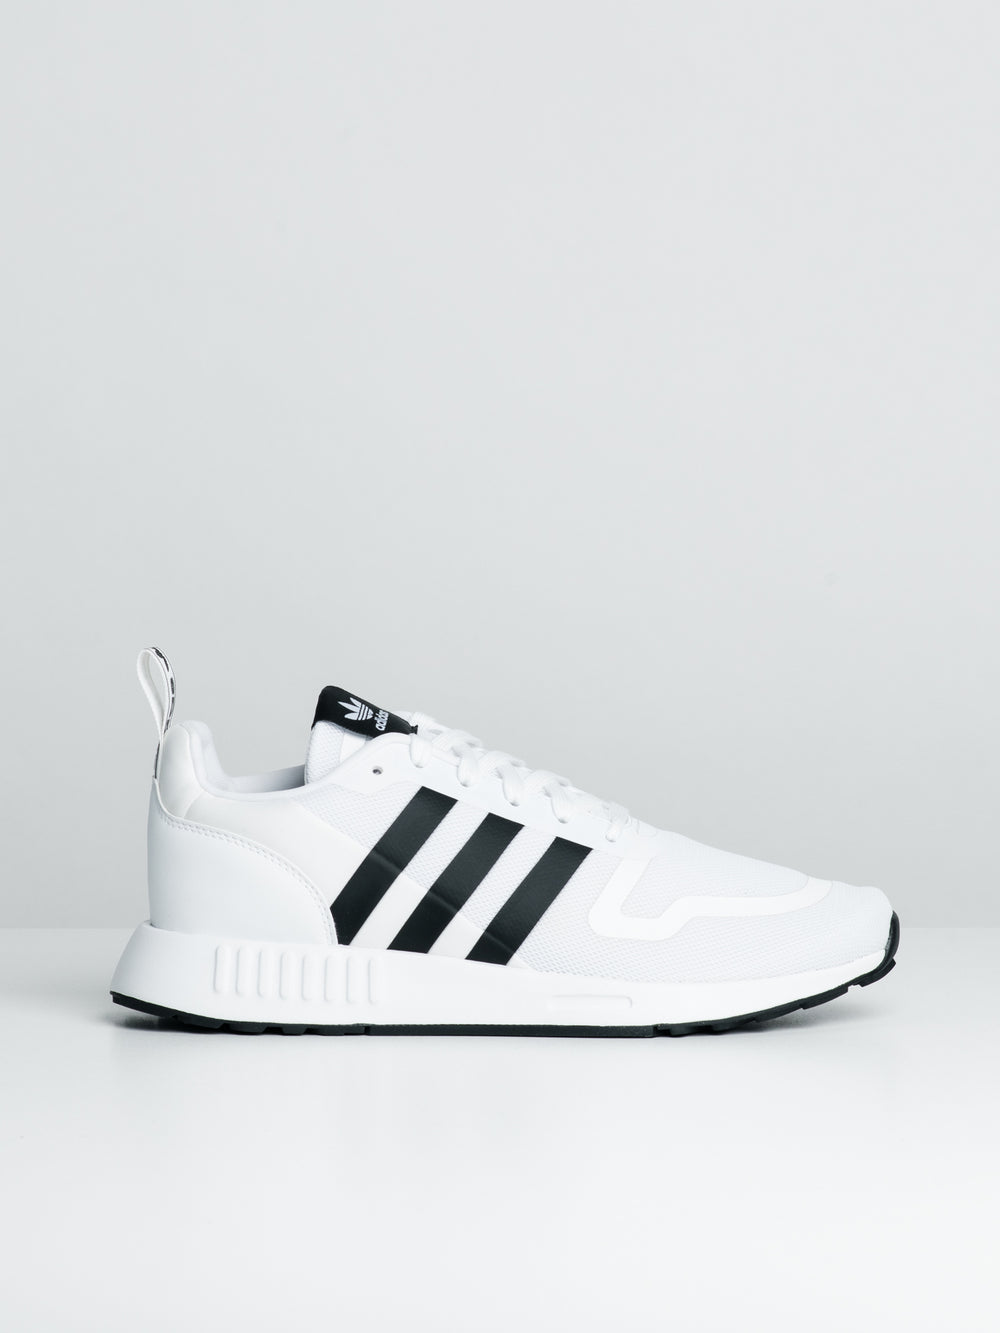 MENS ADIDAS SMOOTH RUNNER - CLEARANCE